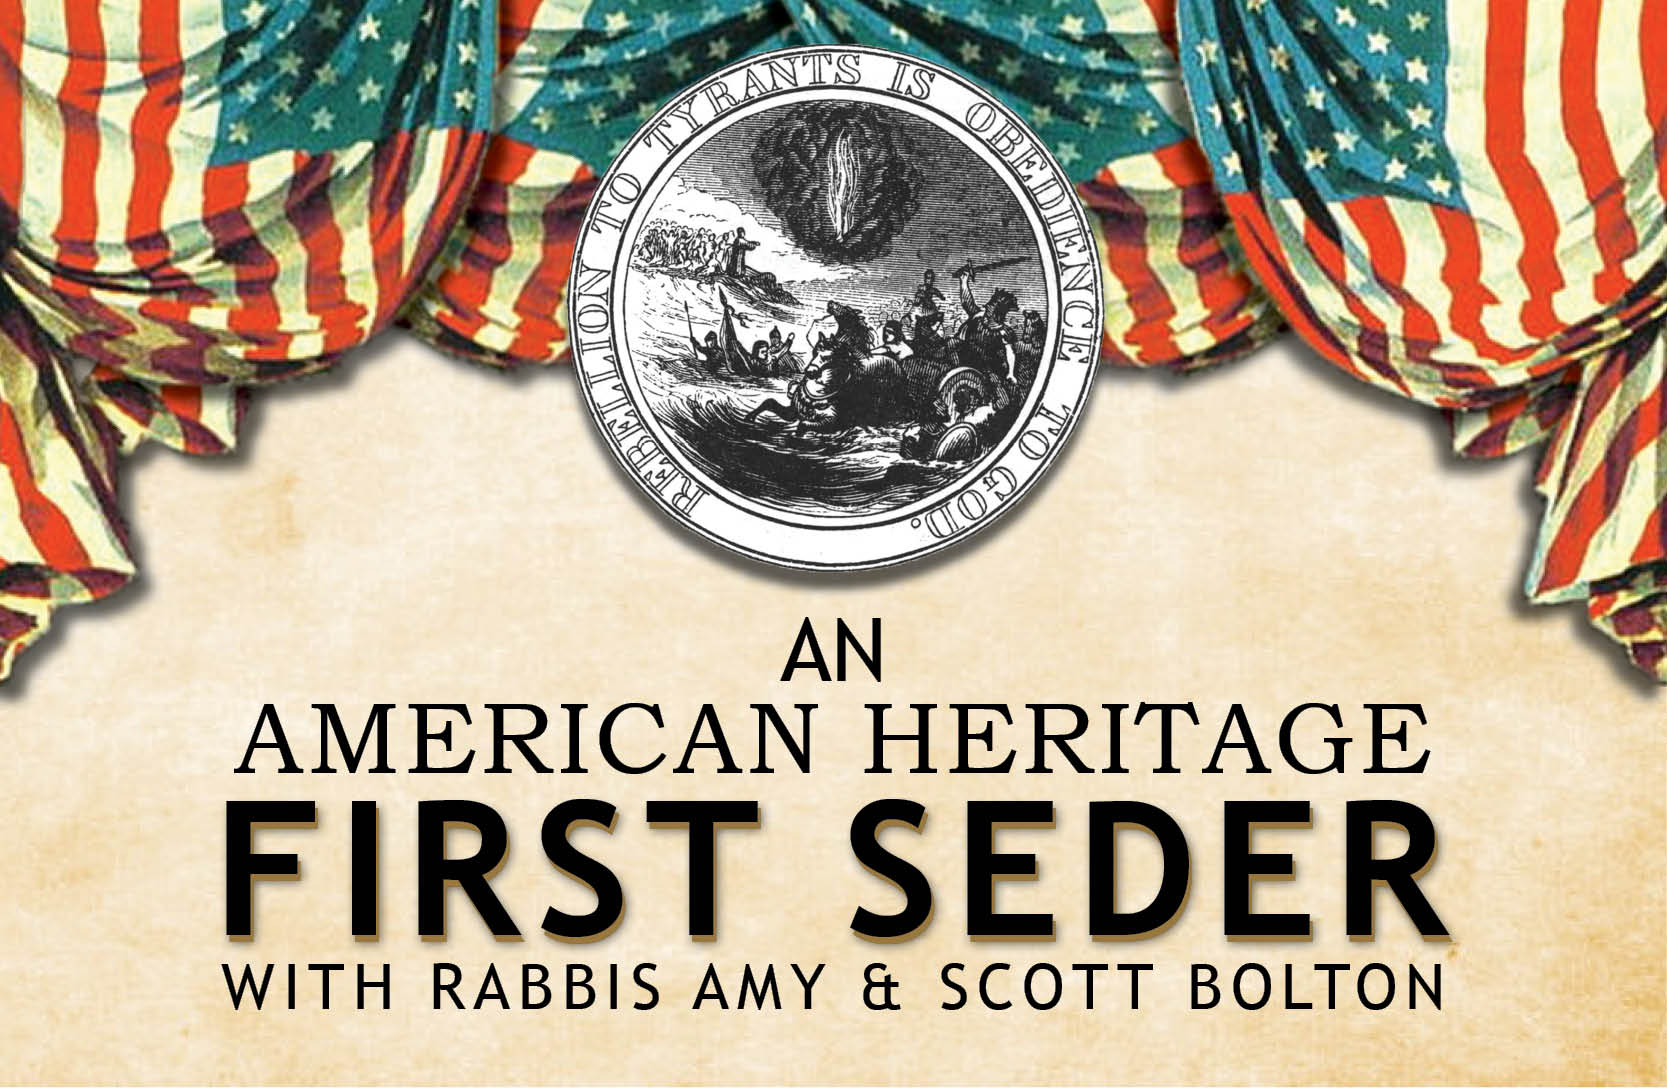 An American Heritage First Seder with Rabbis Amy and Scott Bolton